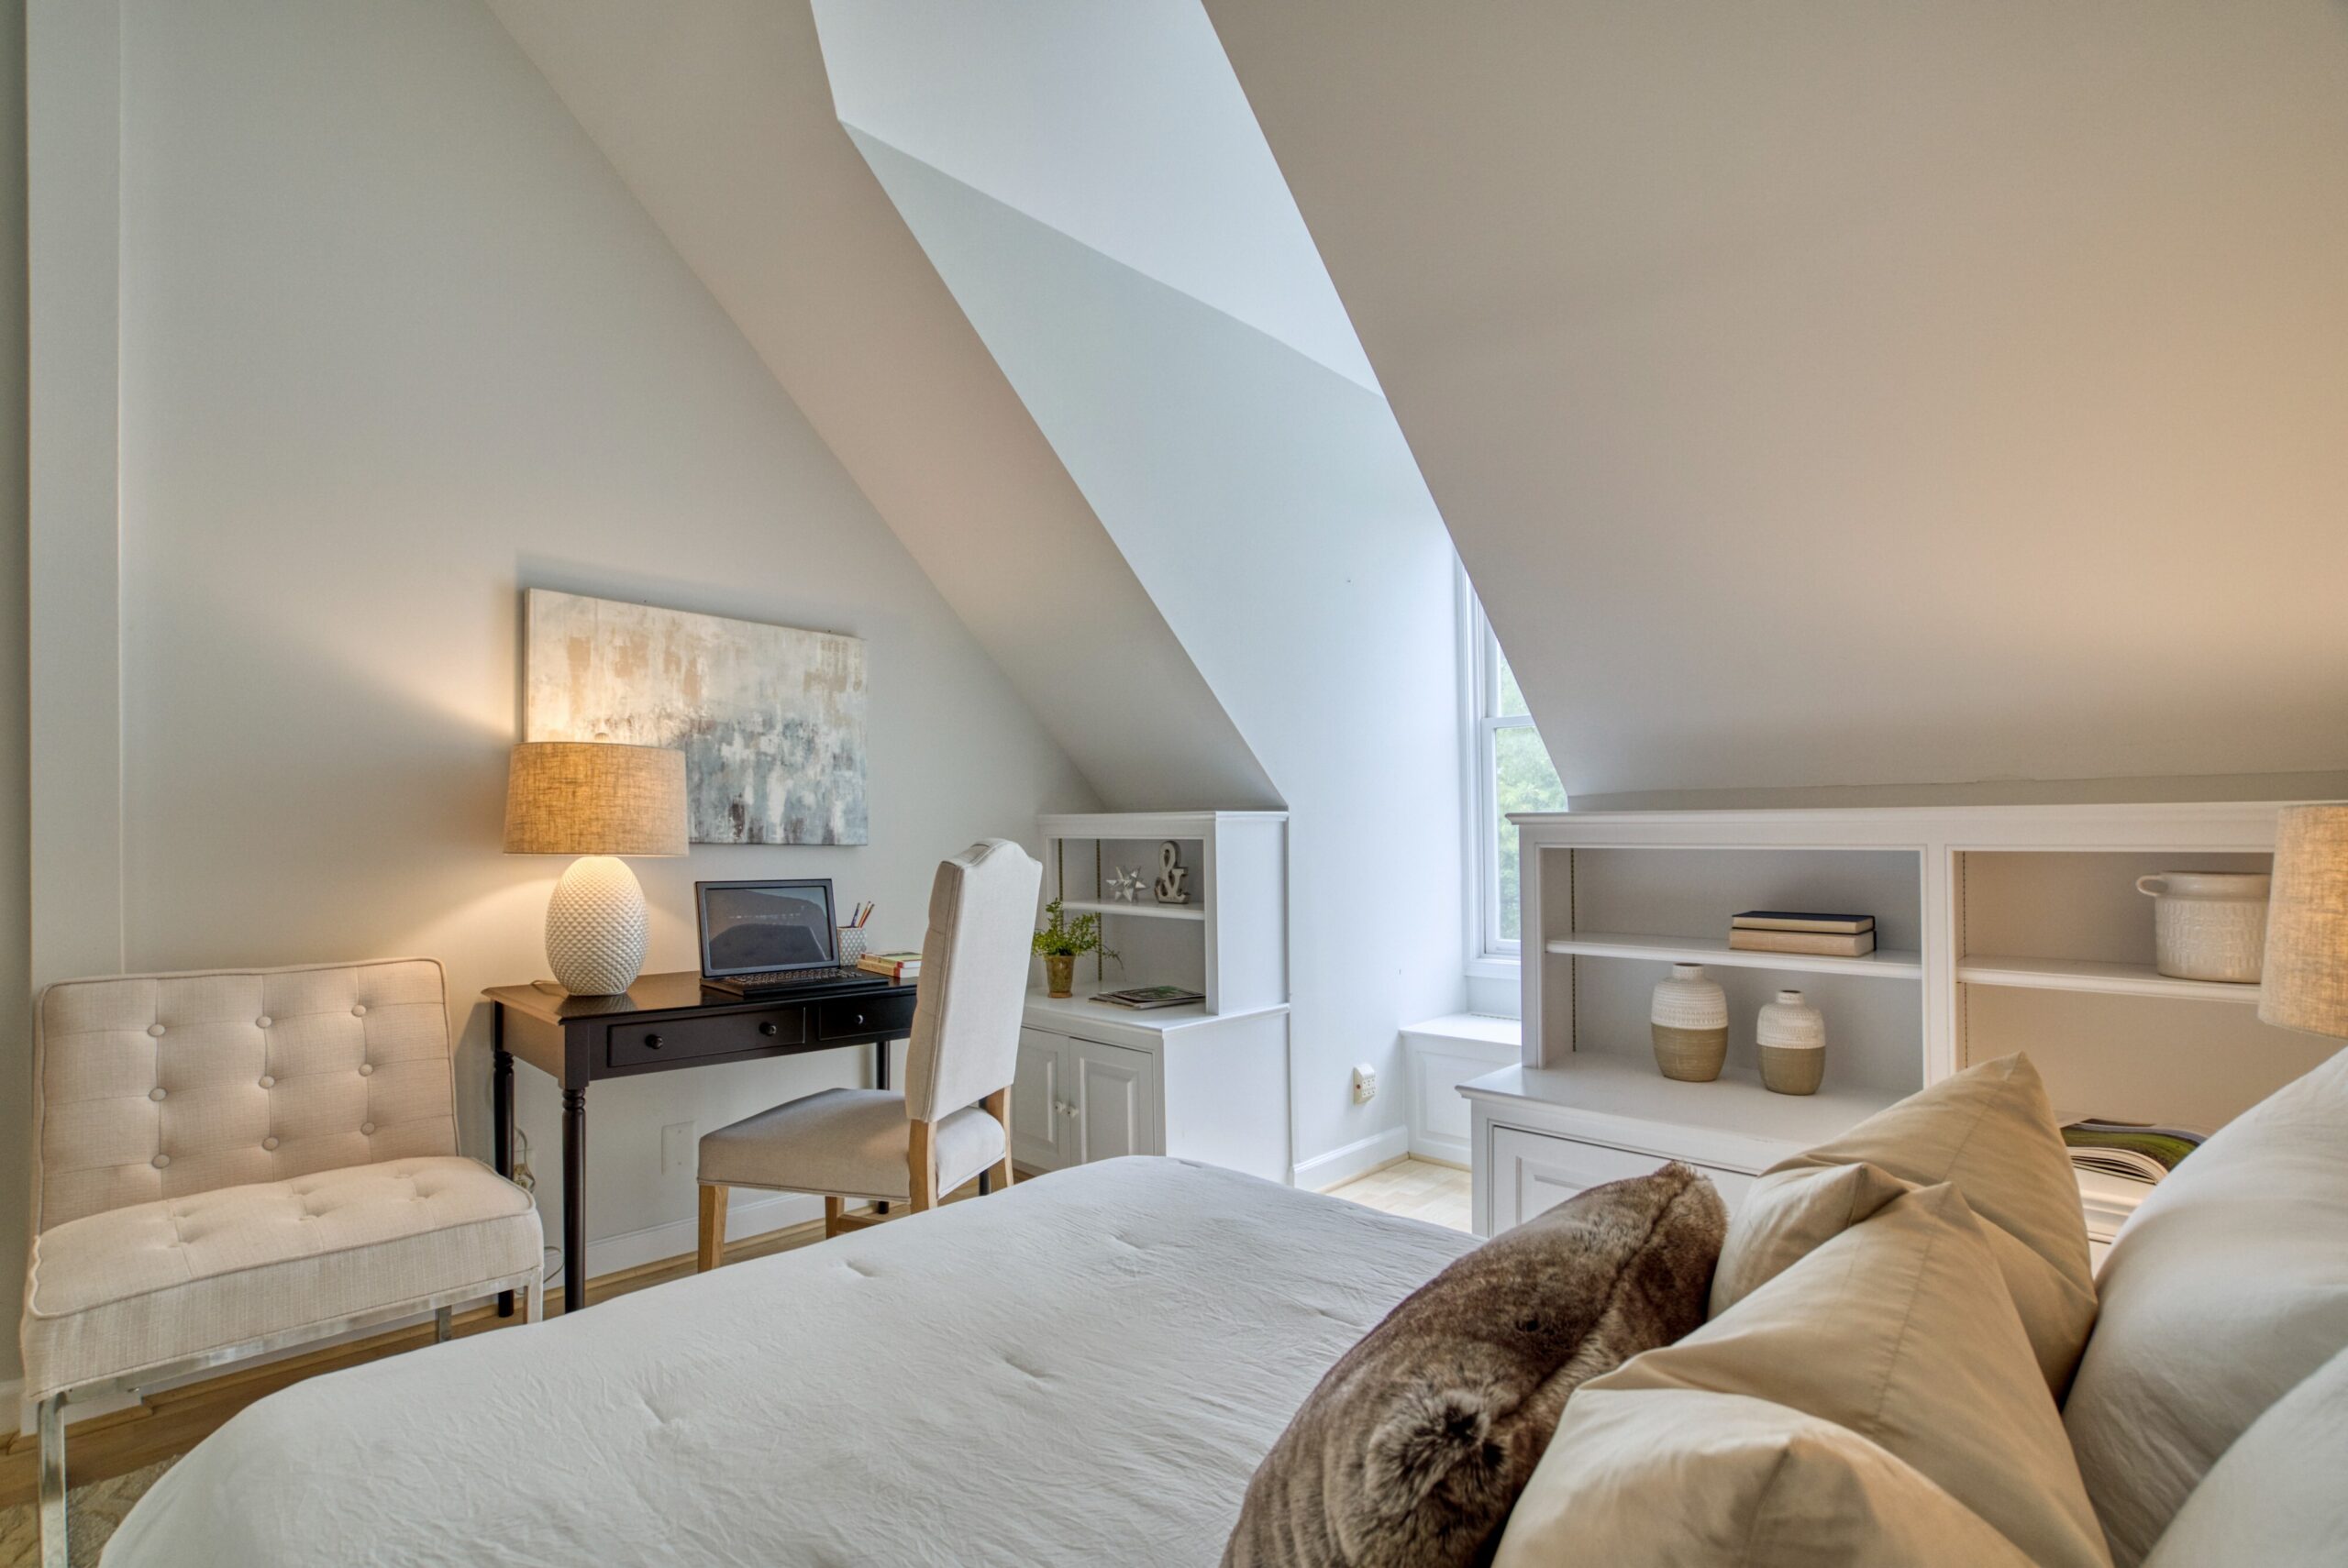 Professional interior photo of 125 N Lee St #401, Alexandria, VA - showing the second bedroom with built-in shelves, vaulted ceilings, and nook out to the window